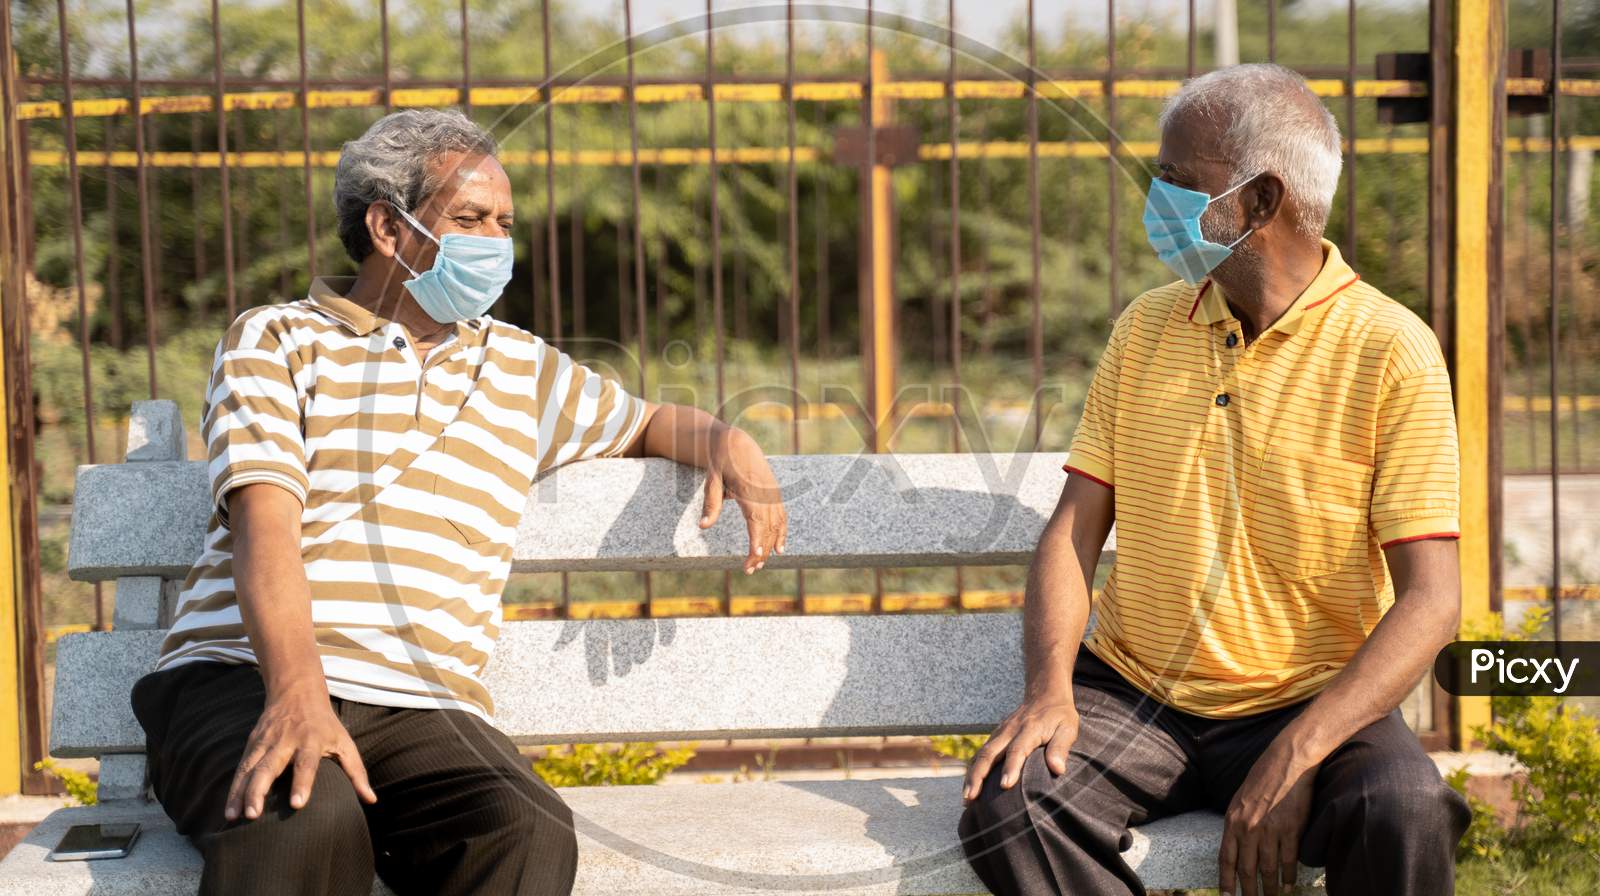 Two Old Senior Friends With Medical Mask Spending Good Time By Talking And While Maintaining Social Distancing At Park - Concept Of New Normal Lifestyle Due To Coronavirus Covid-19 Pandemic